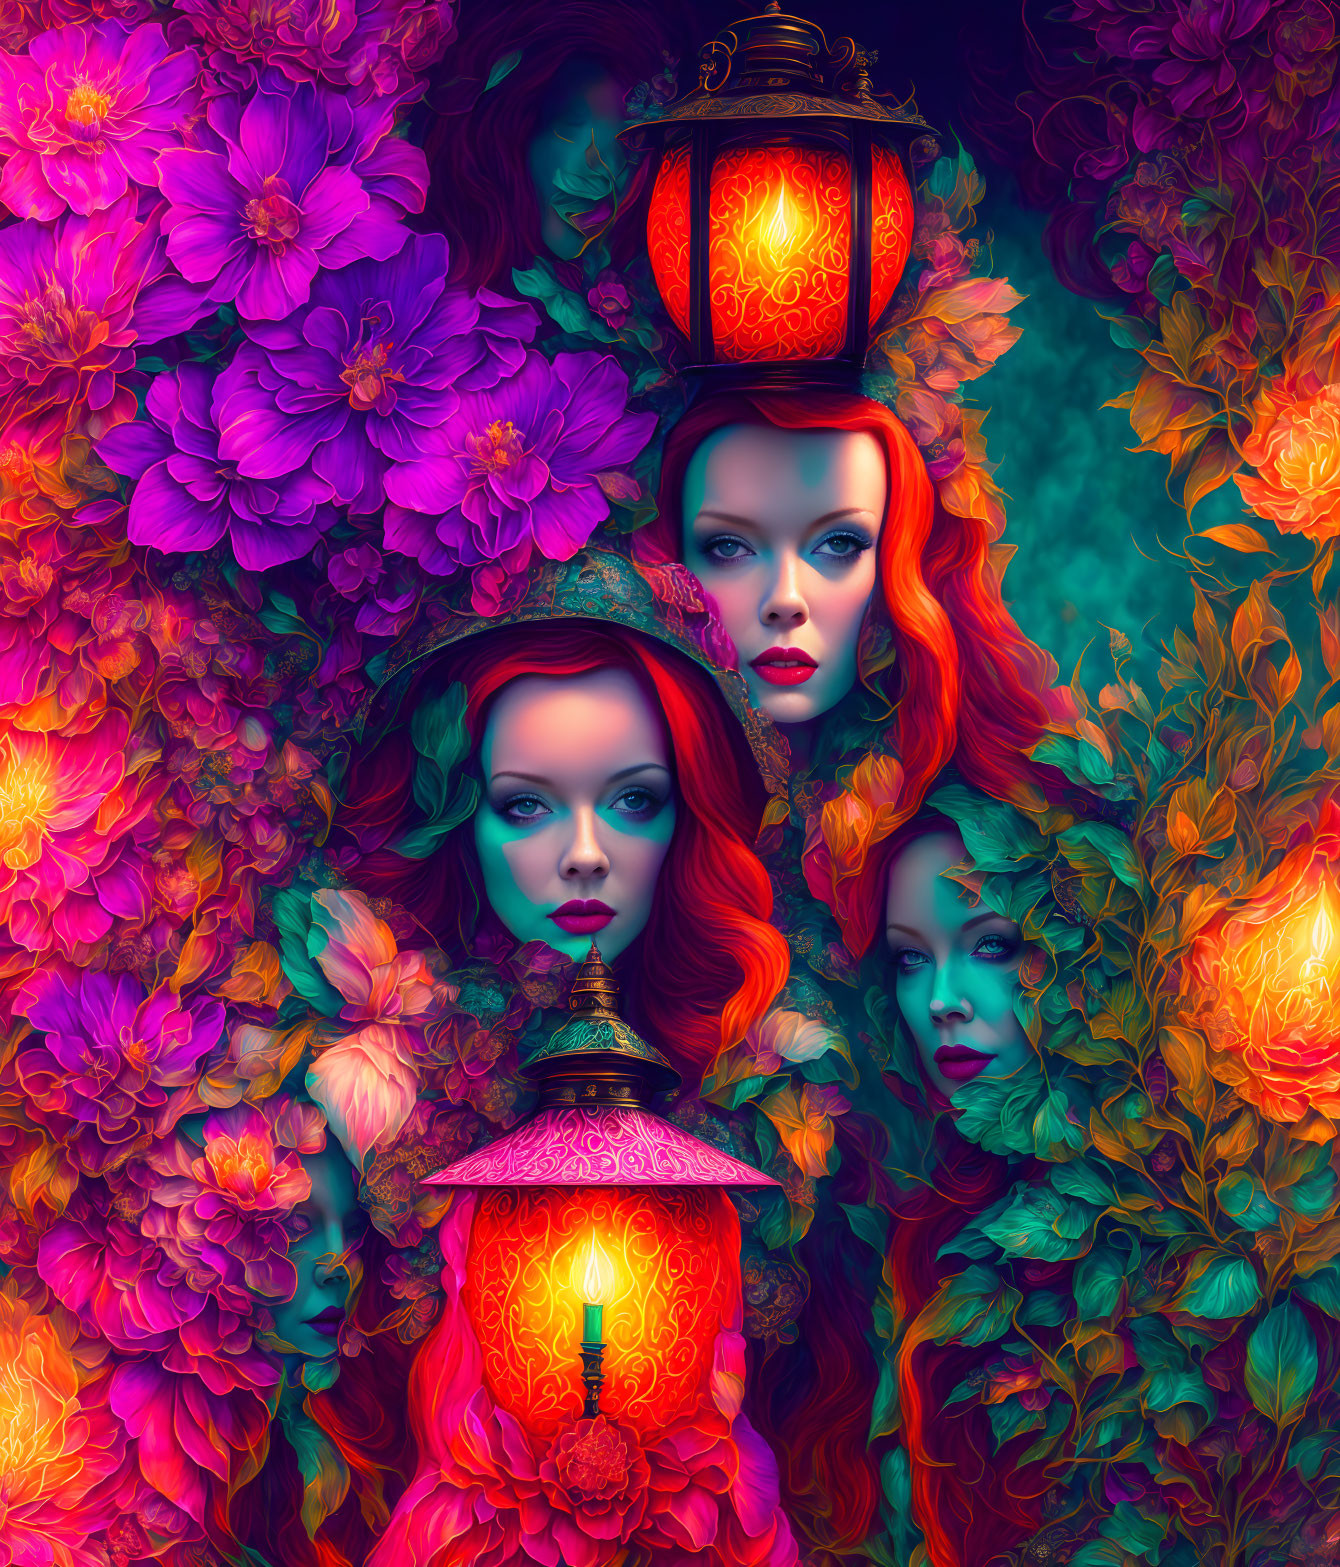 Colorful digital artwork: Women's faces with flowers and lanterns.